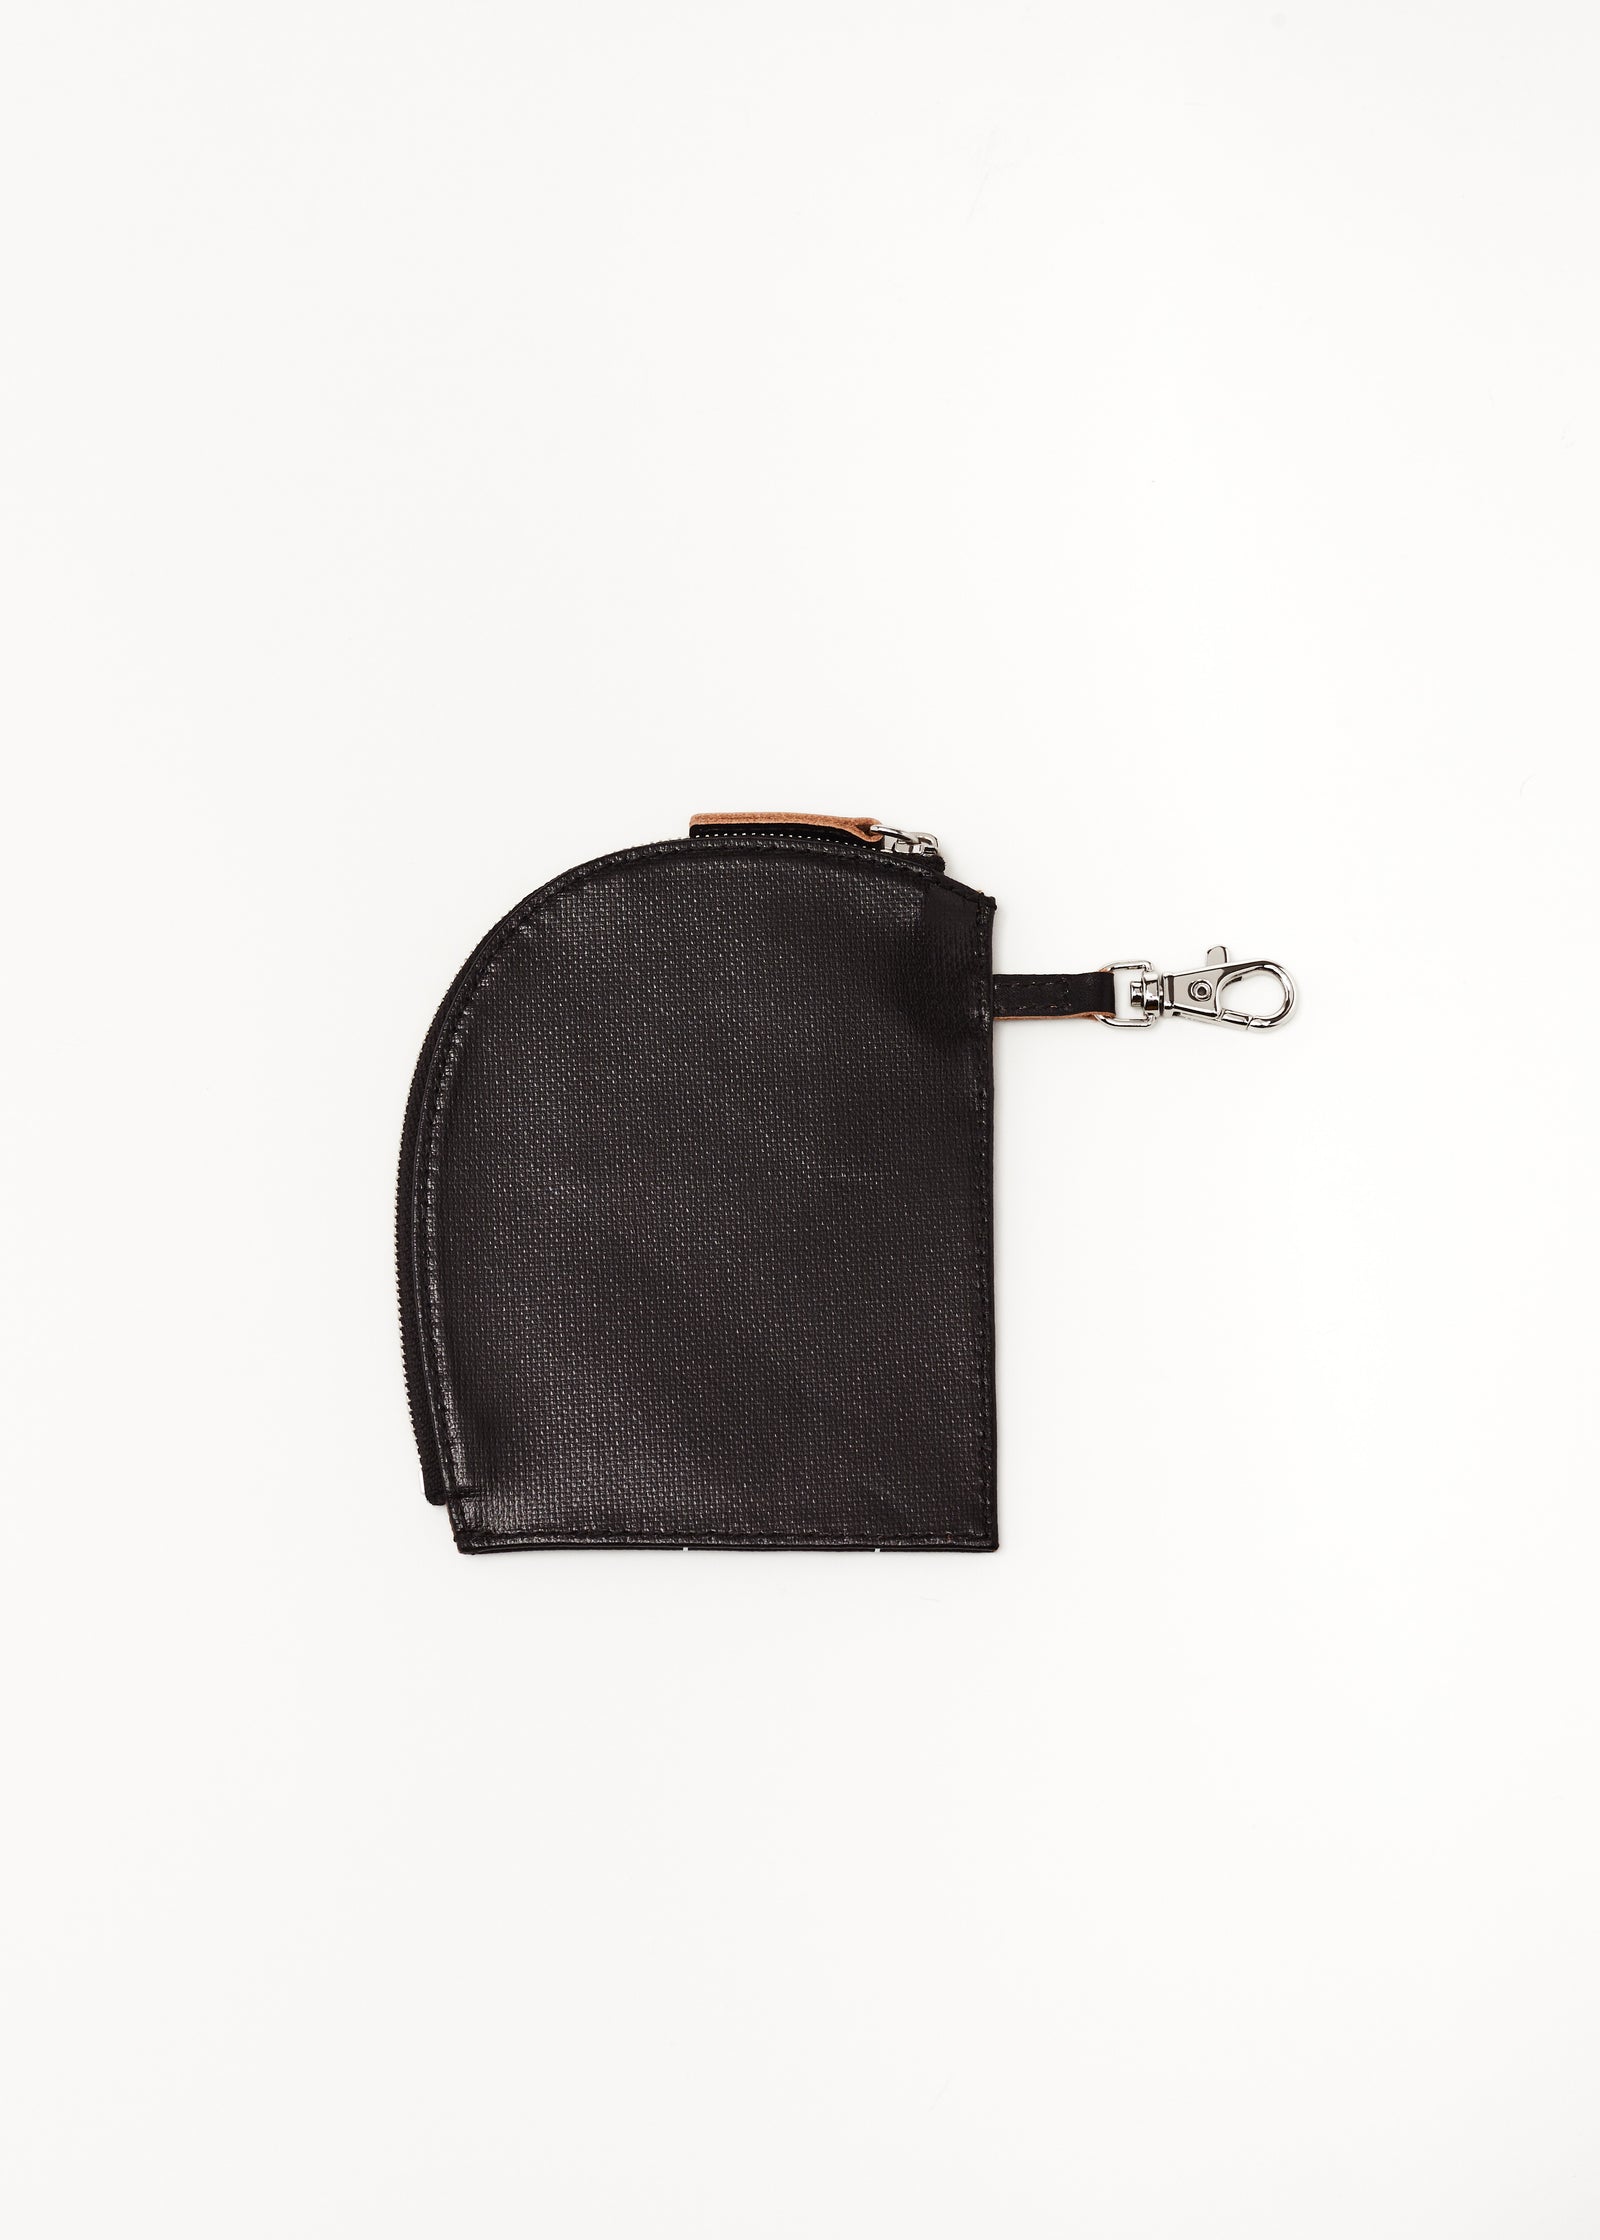 "PILI AND BIANCA" BLACK LEATHER CROSSBODY BELT WITH WALLETS